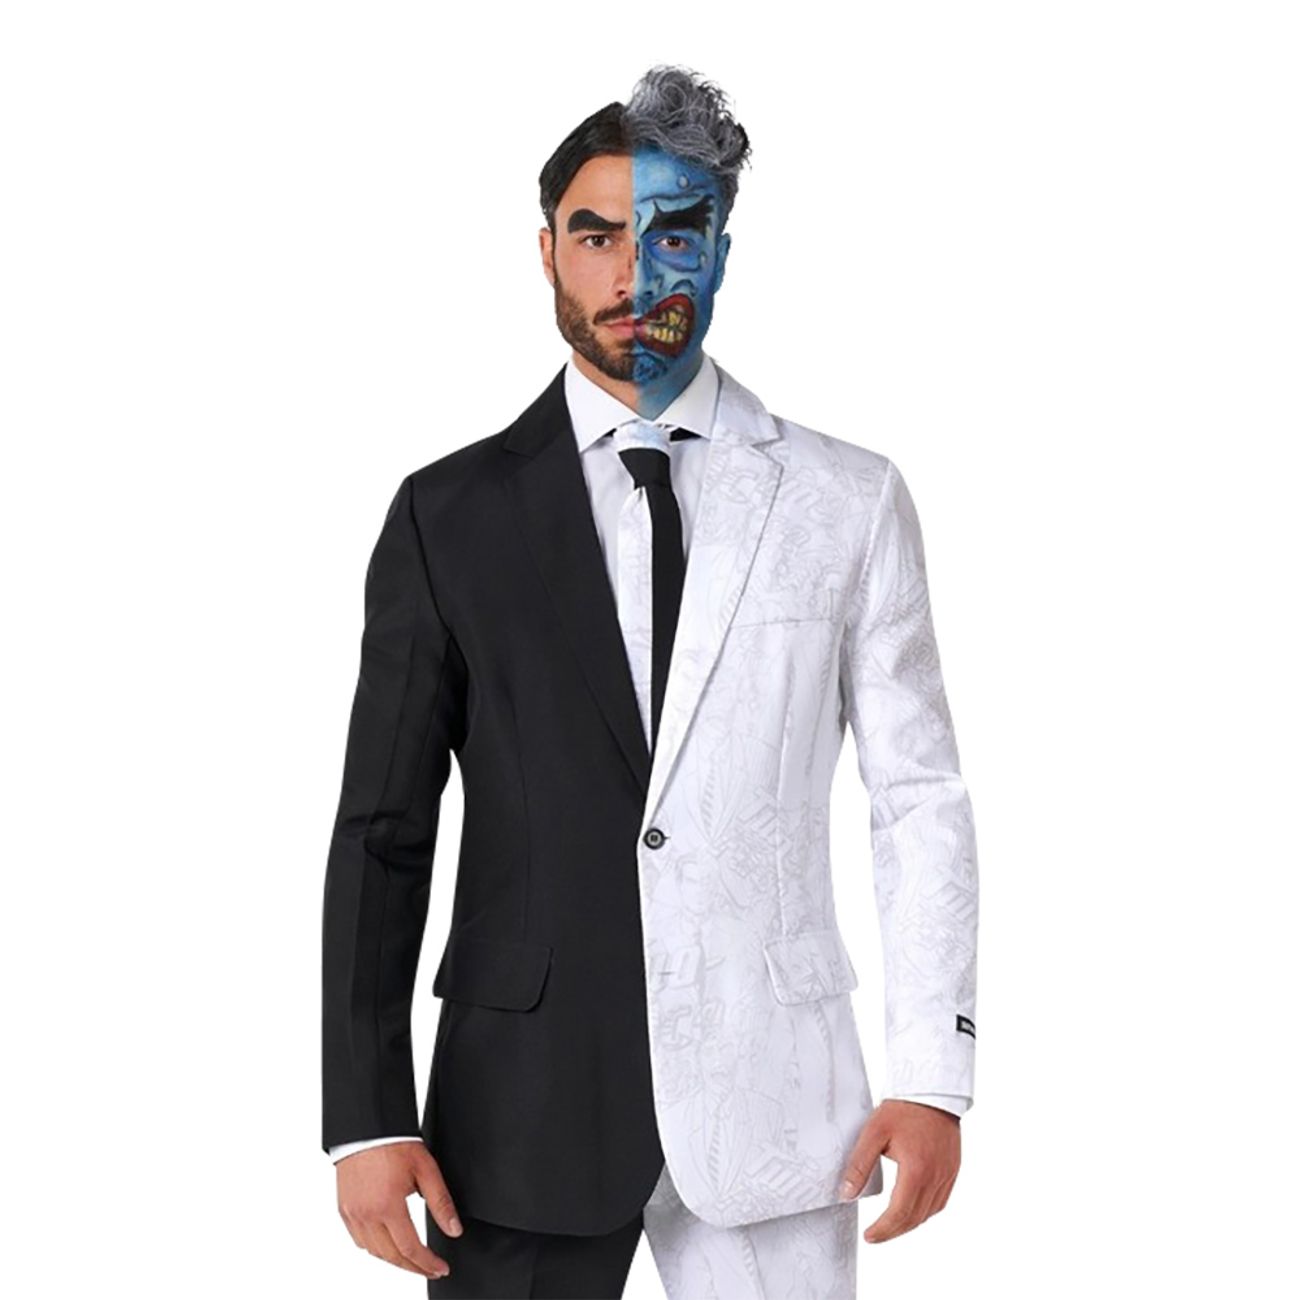 suitmeister-two-face-kostym-89764-10